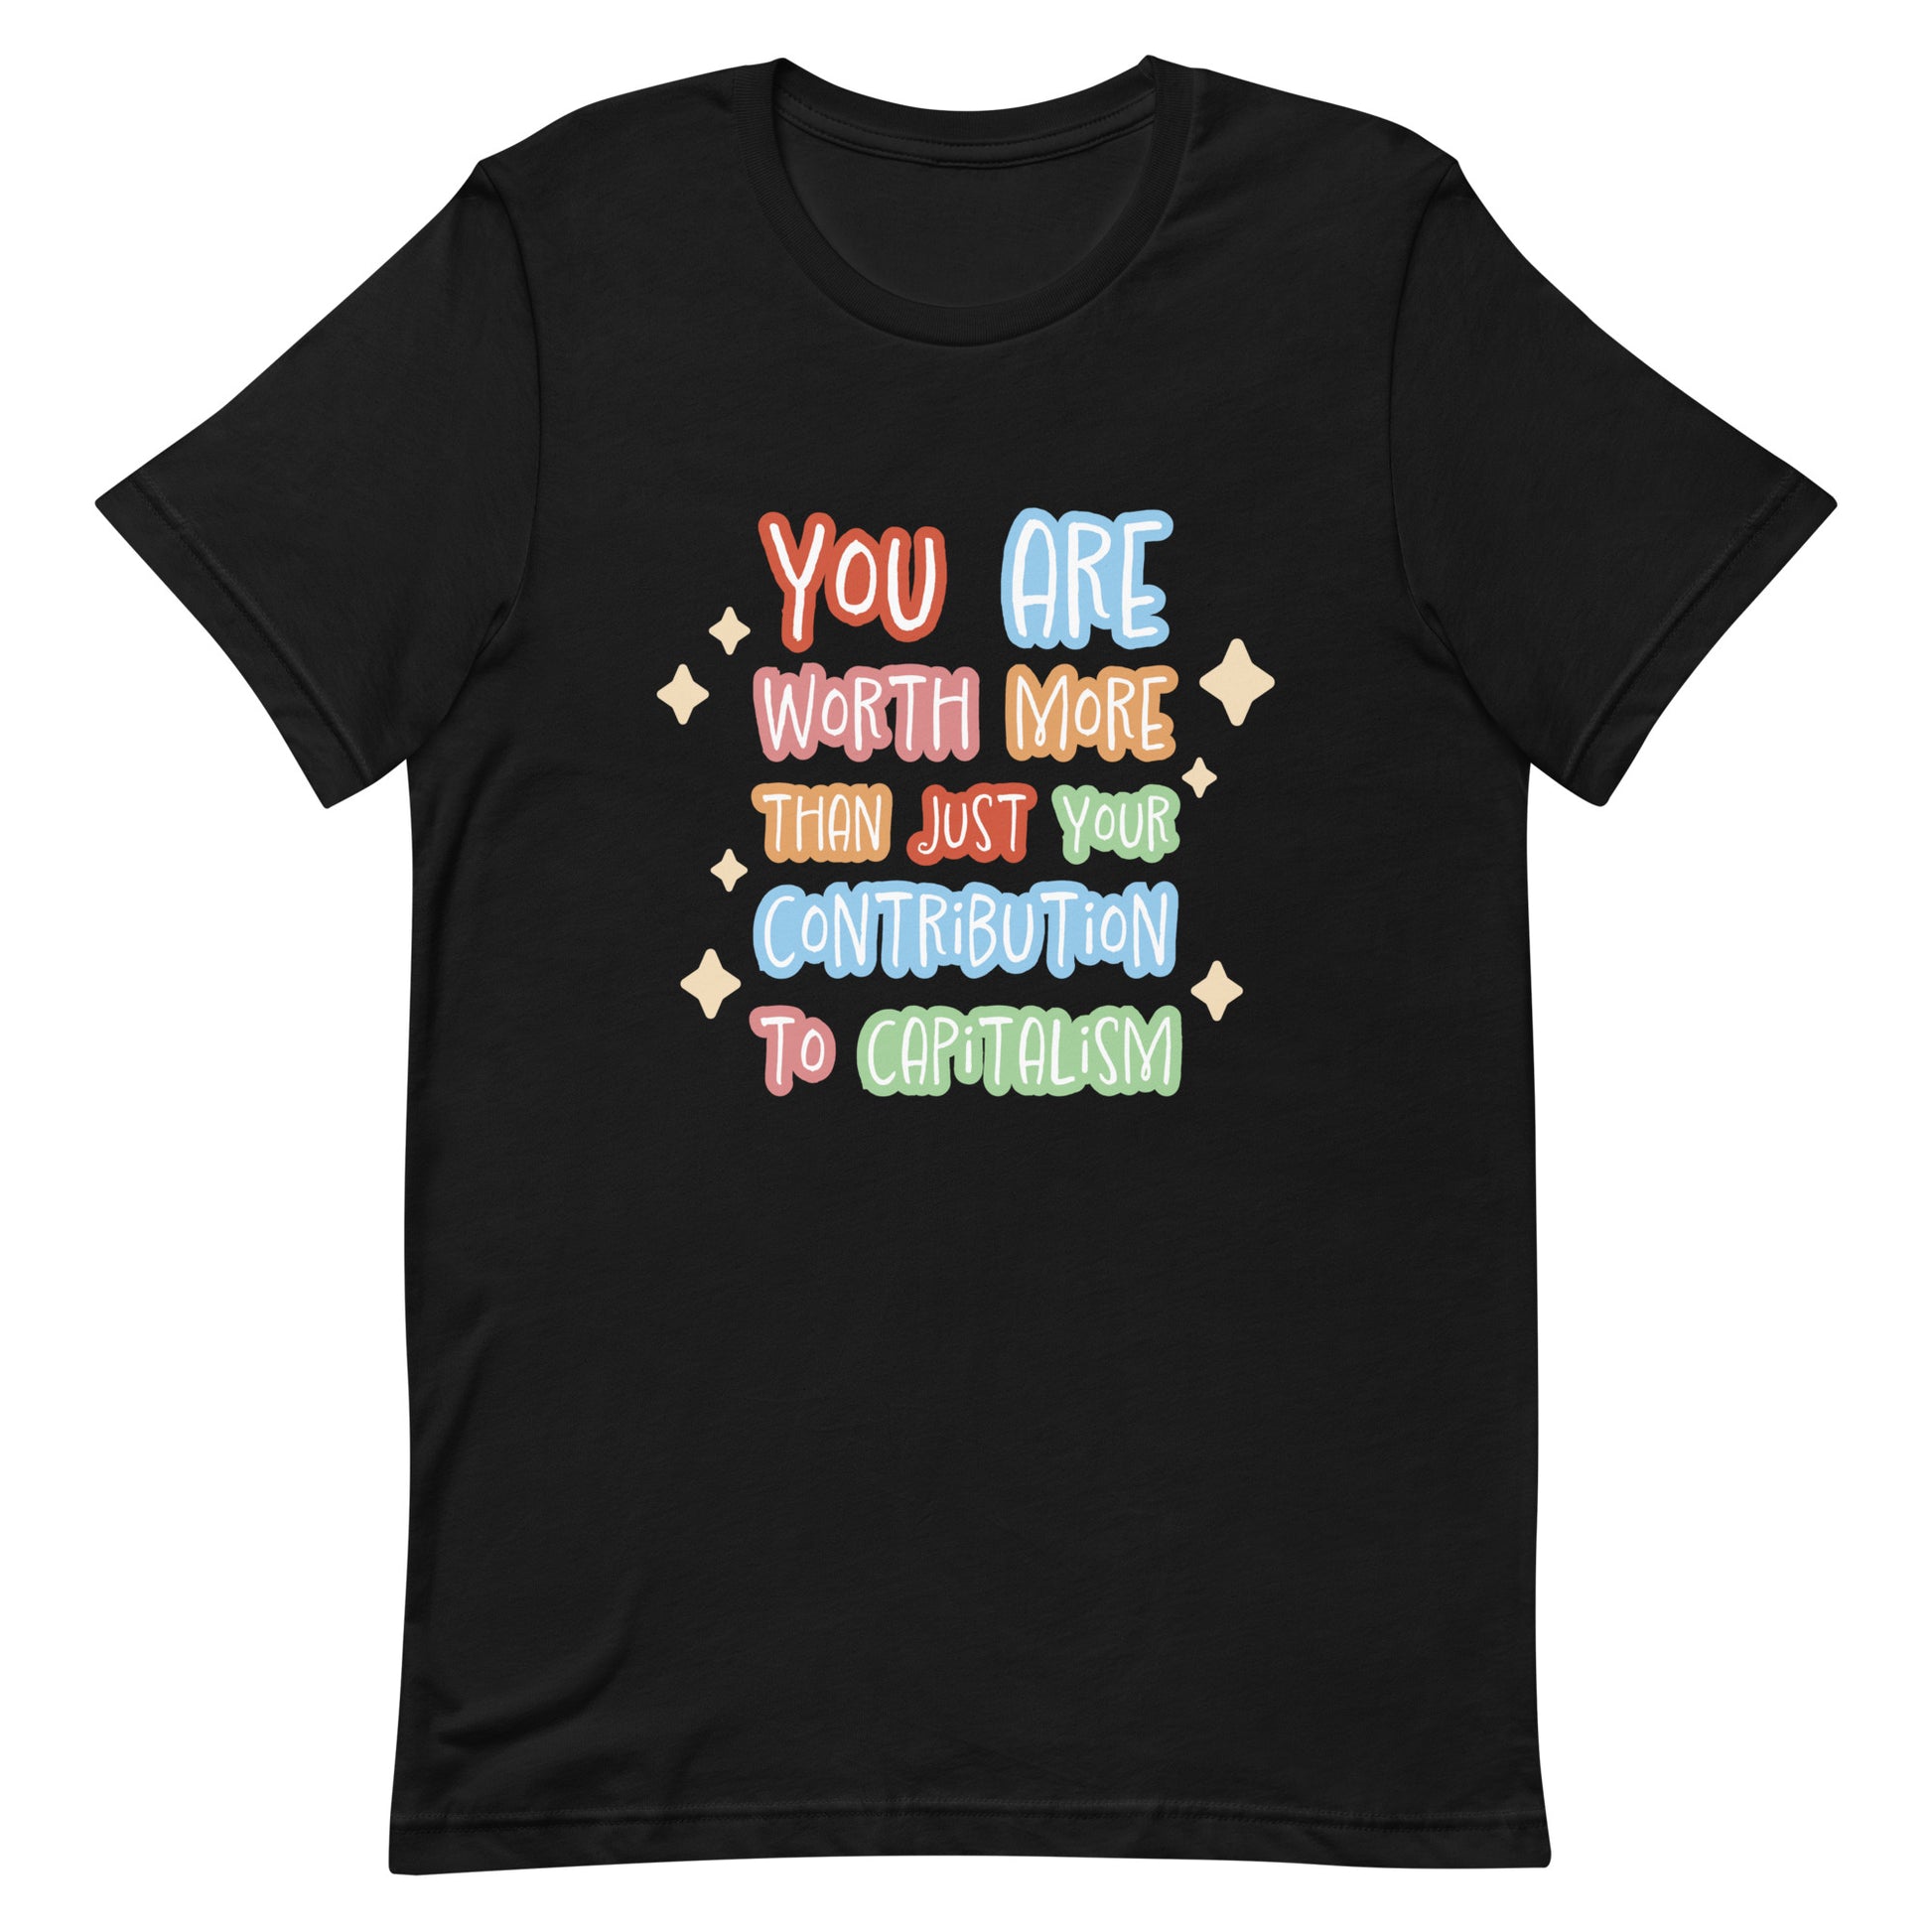 A black crewneck t-shirt featuring colorful hand-written-style text that reads "You are worth more than just your contribution to capitalism". Sparkles surround the text on each side.